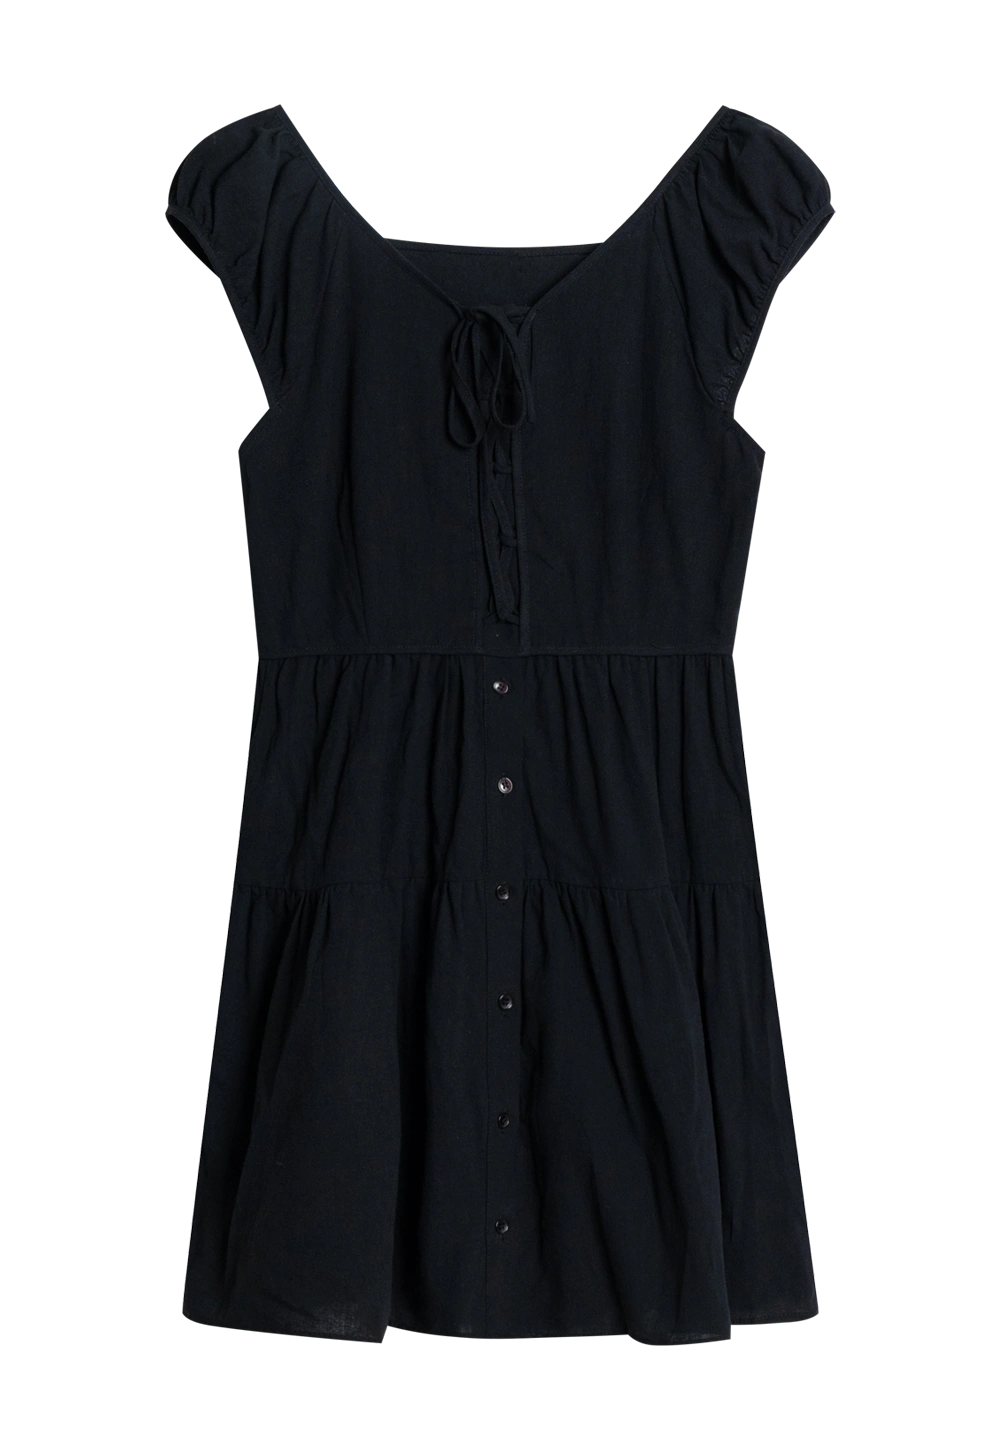 Women's Tie-Front V-Neck Dress with Ruffled Sleeves